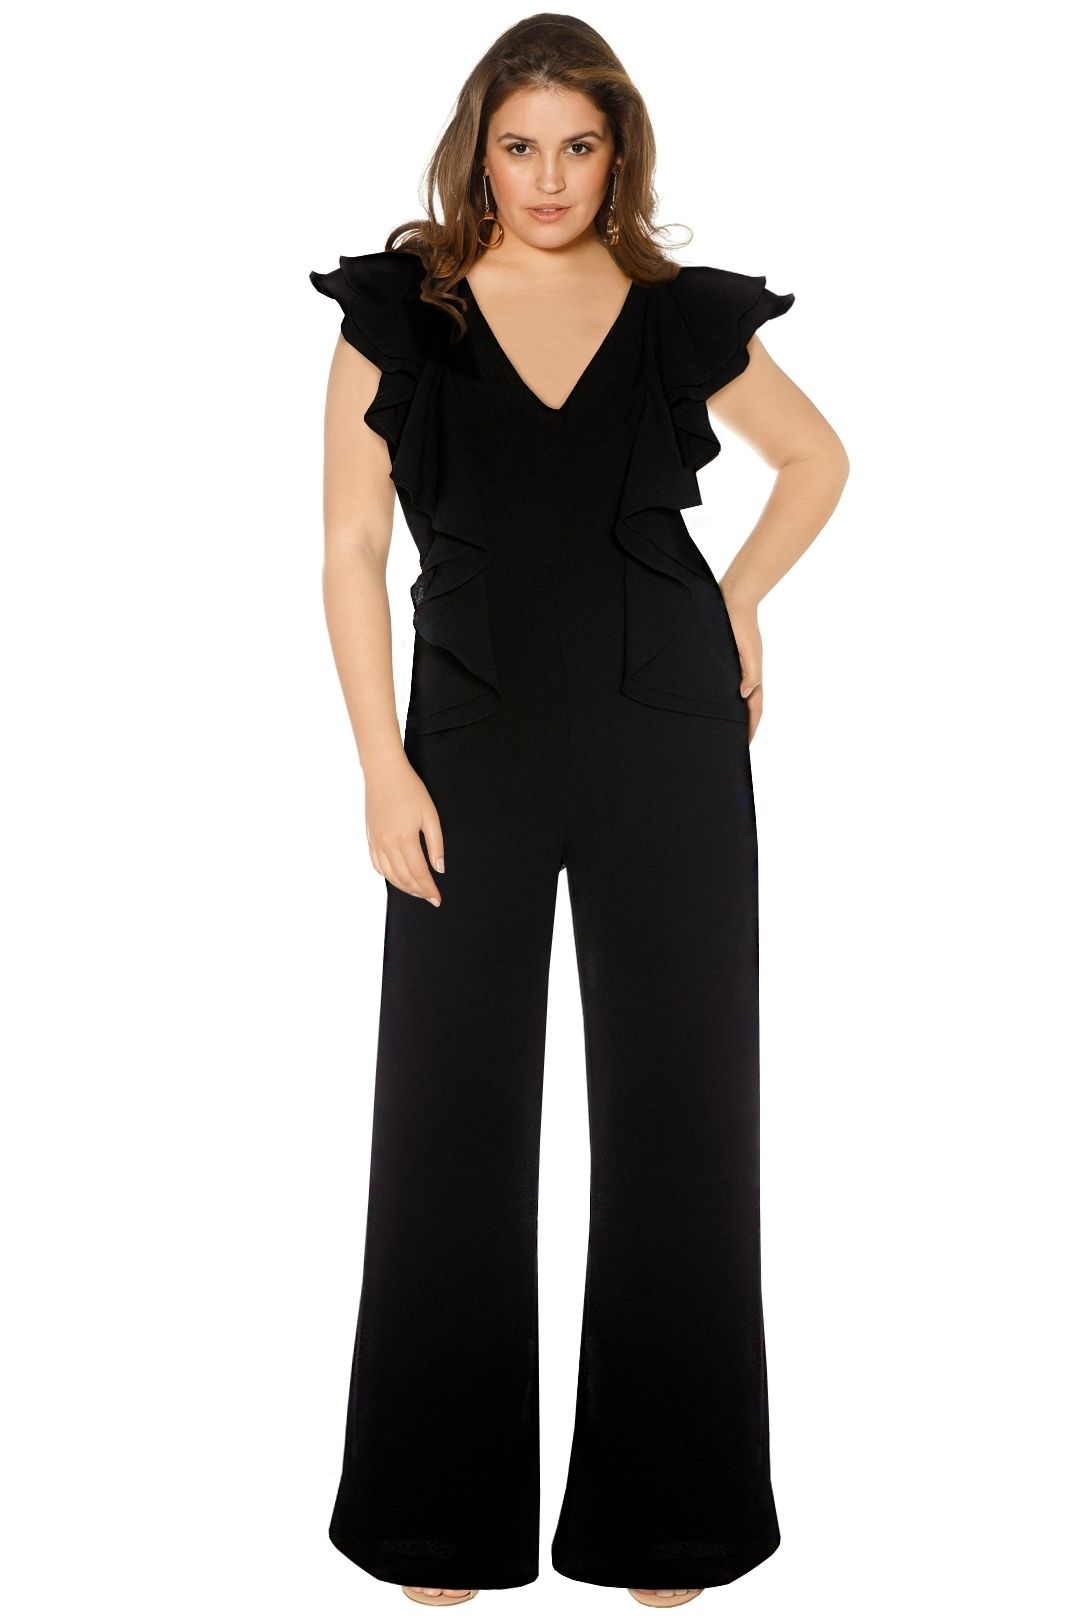 Metal Clouds Pantsuit in Black by C/MEO Collective for Rent